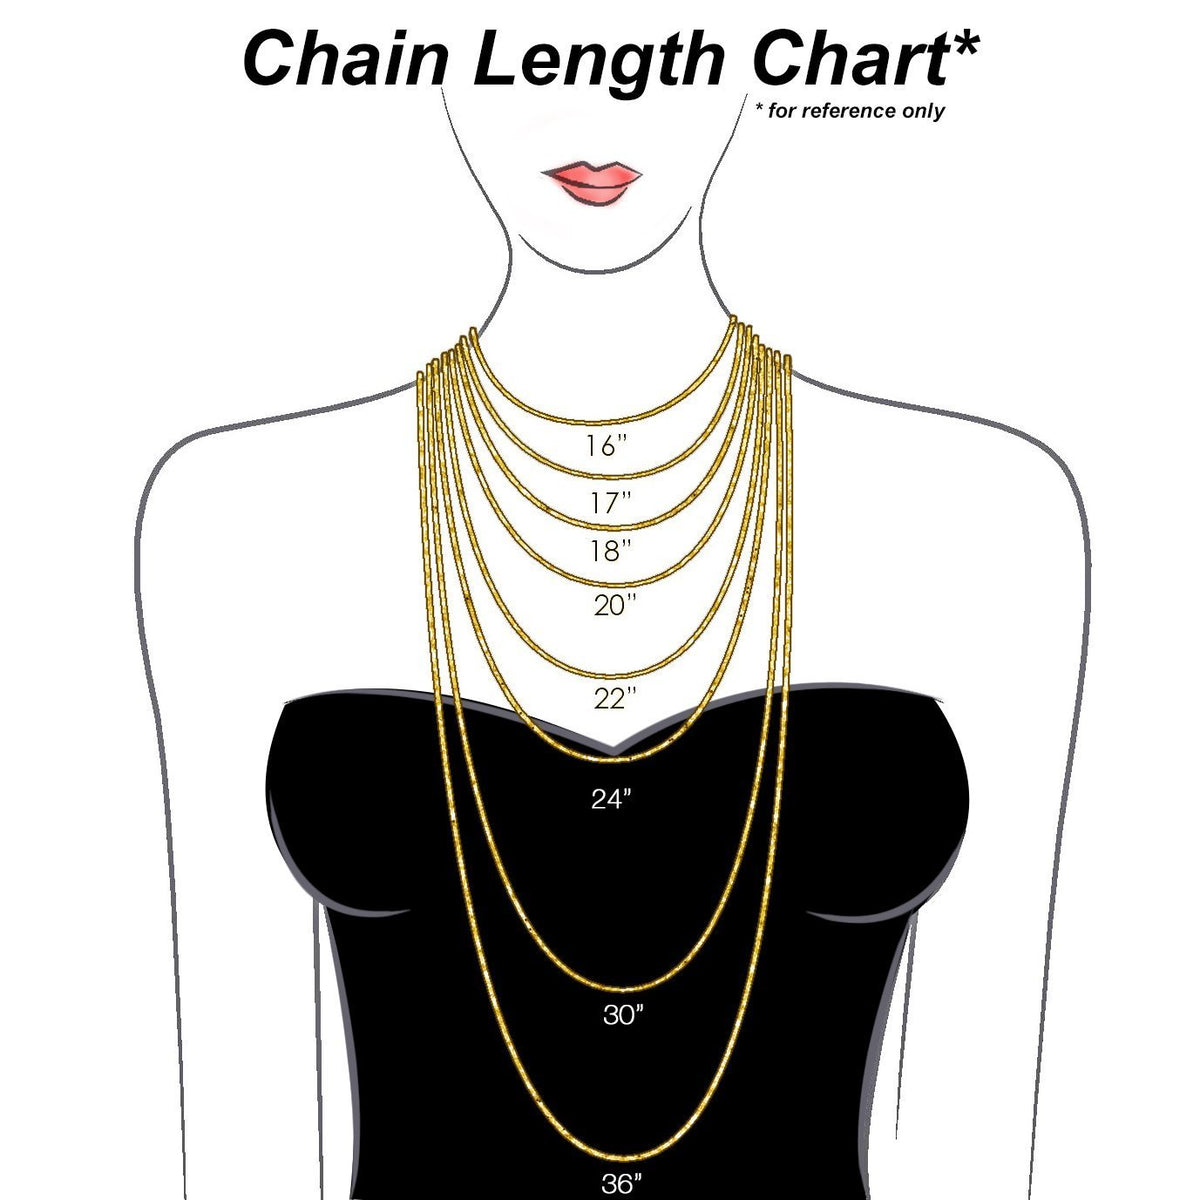 14KT YELLOW GOLD 1.5MM FLAT LIGHTWEIGHT ANCHOR CHAIN - 4 LENGTHS 16 Inch,18 Inch,20 Inch,24 Inch